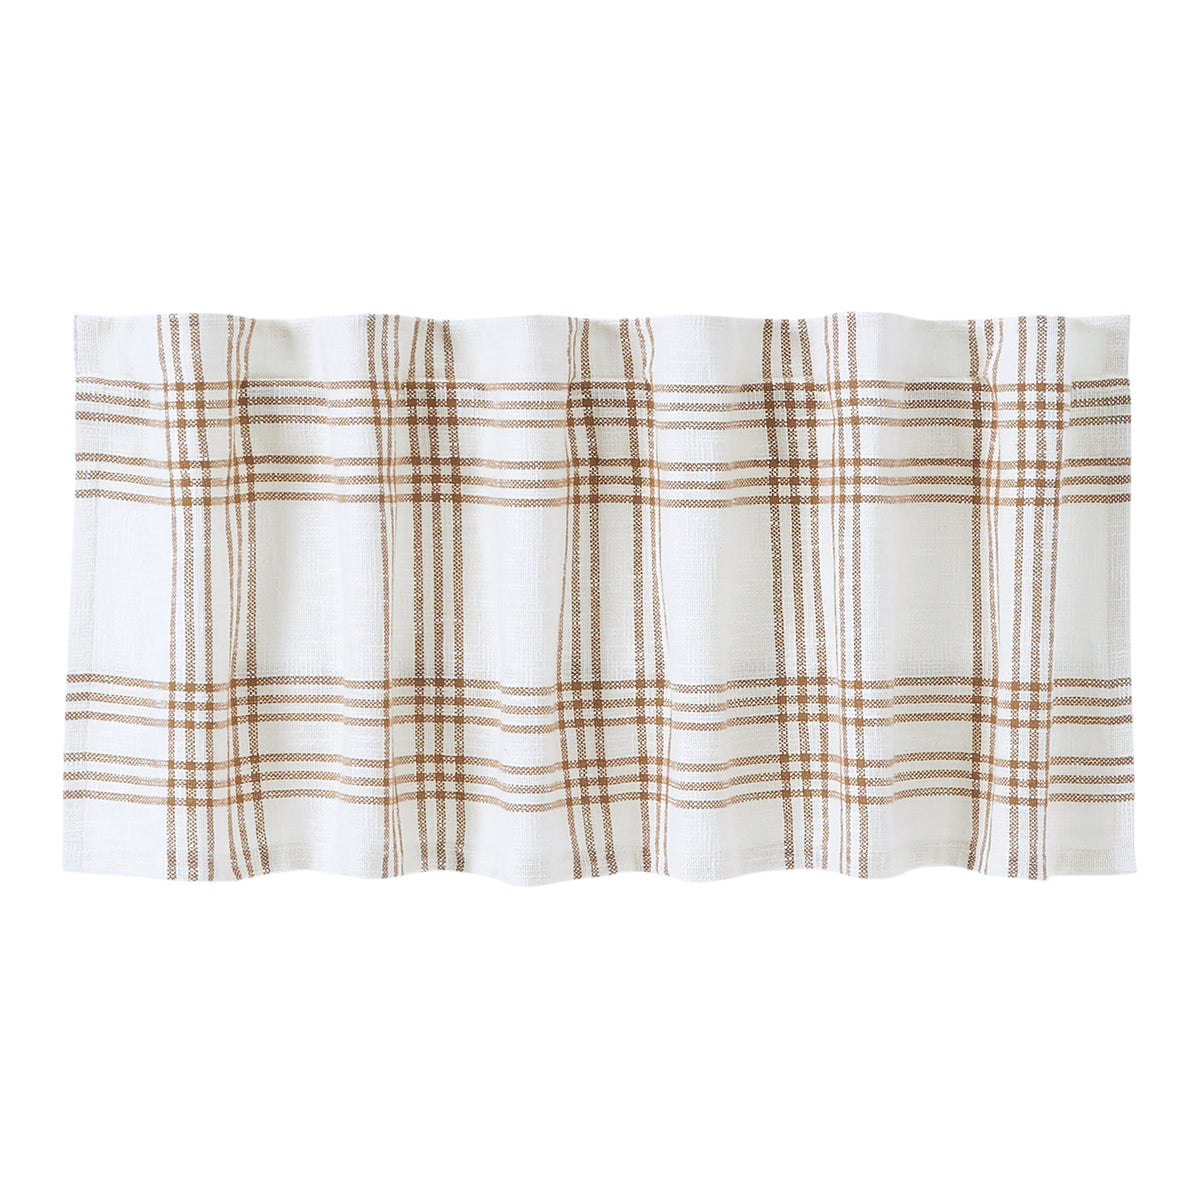 April & Olive Wheat Plaid Valance 19x60 By VHC Brands